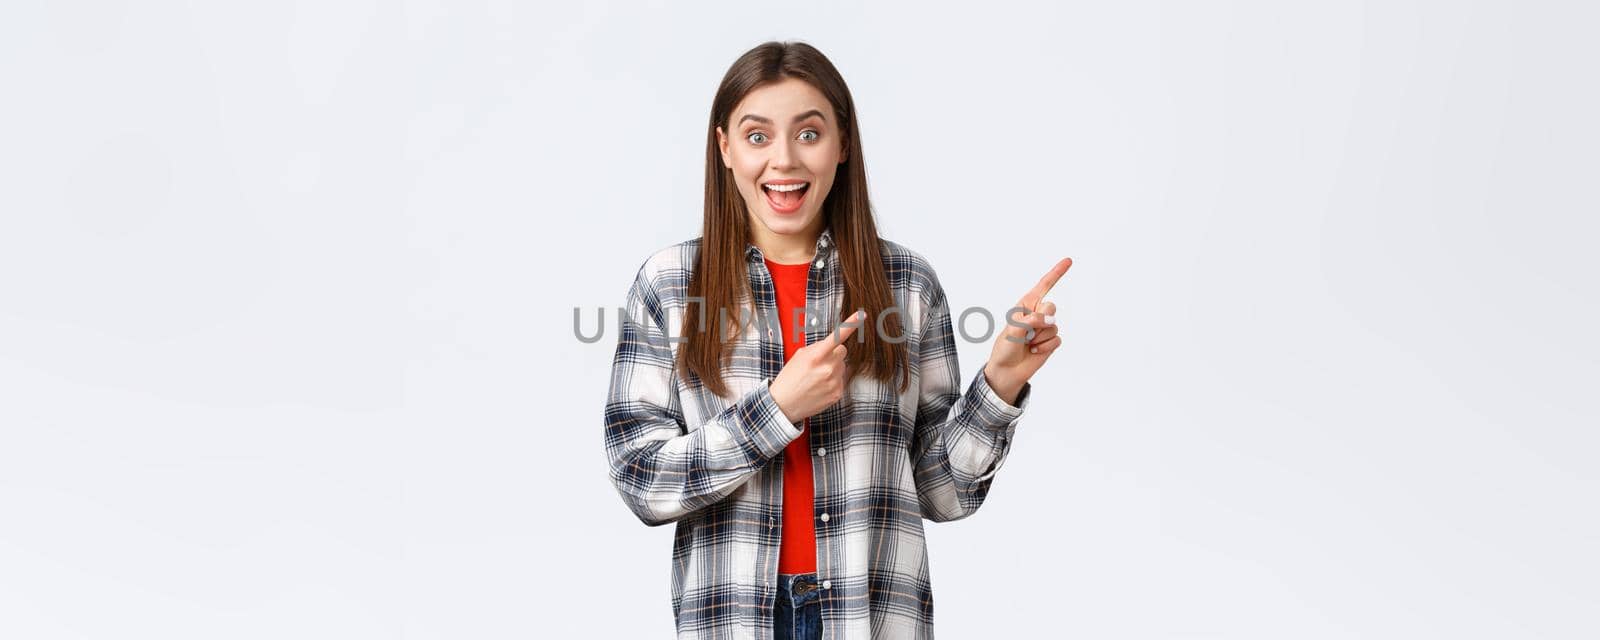 Lifestyle, different emotions, leisure activities concept. Excited girl in checked casual shirt gladly tell about great dicounts, pointing fingers upper right corner, talking to you, rejoicing.